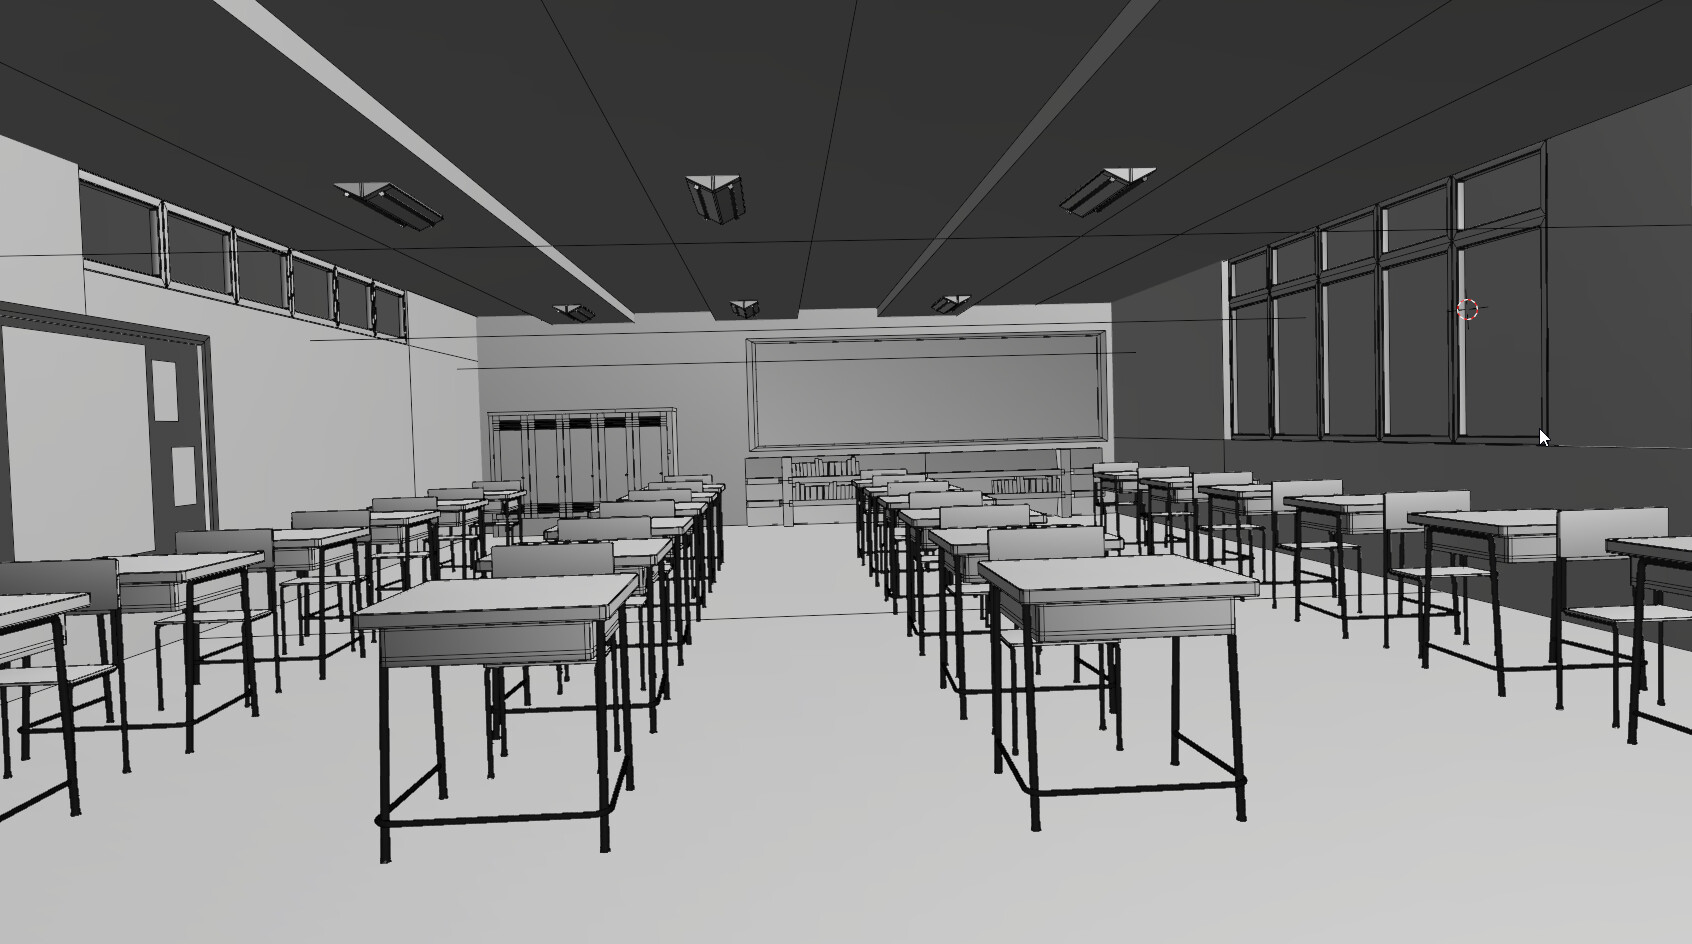 Black & White Anime Classroom Background Graphic by MeiMei10 · Creative  Fabrica